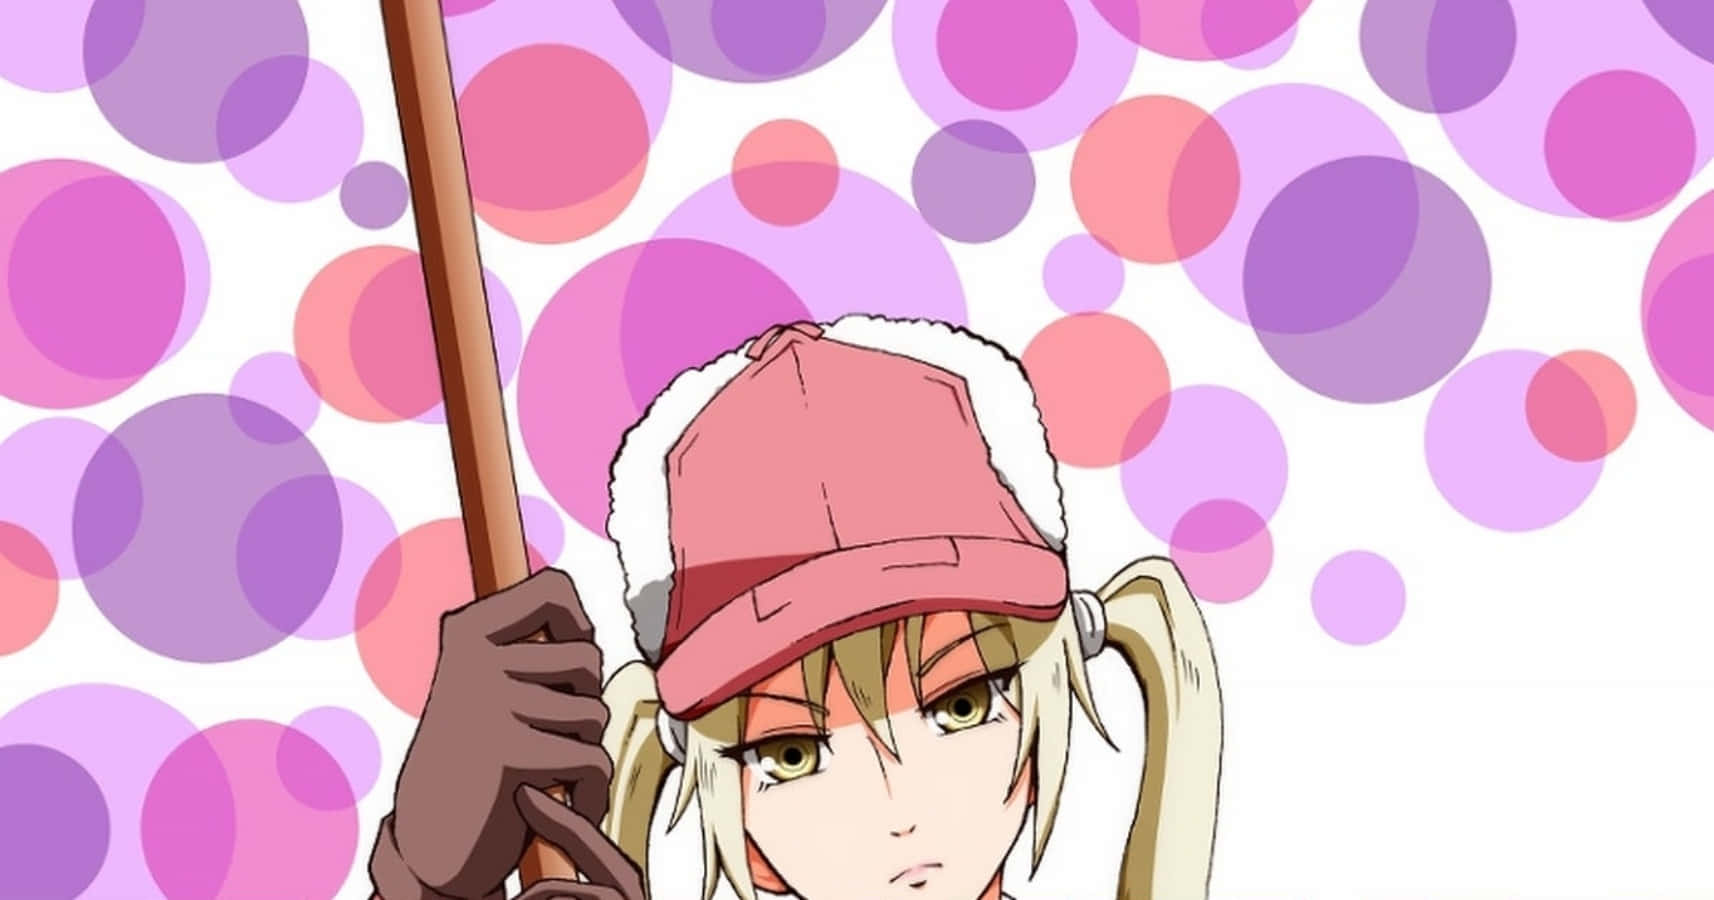 Eosinophil, The Immune Warrior From Cells At Work Anime Series Wallpaper